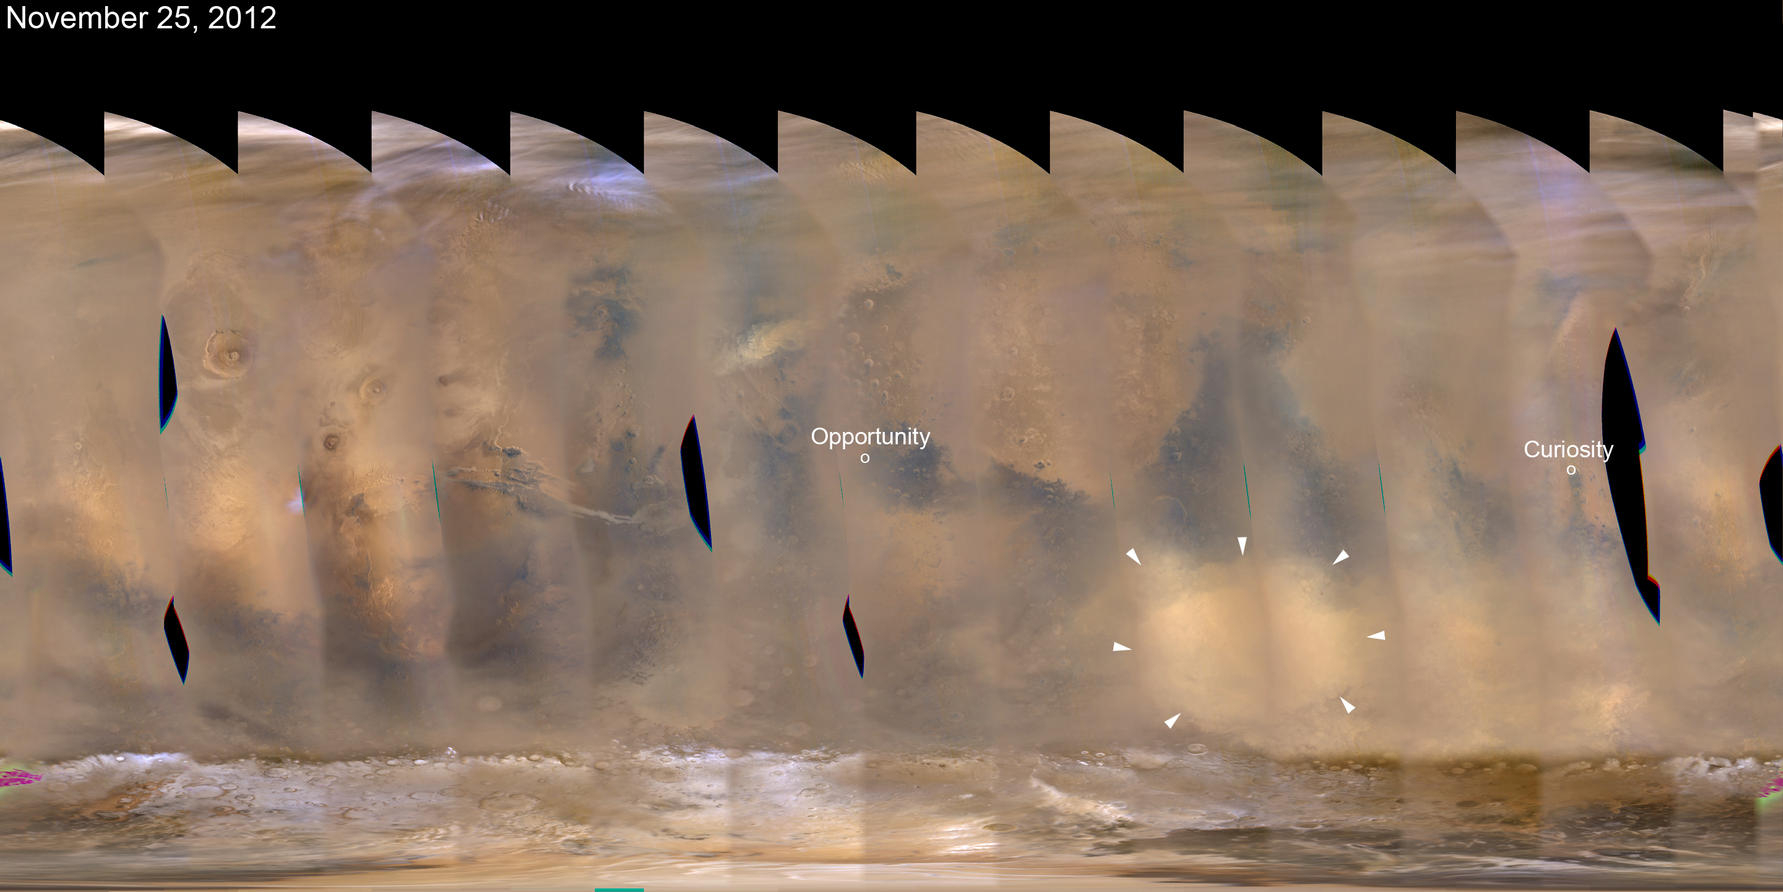 A regional dust storm visible in the southern hemisphere of Mars in this nearly global mosaic of observations made by the Mars Color Imager on NASA's Mars Reconnaissance Orbiter on Nov. 25, 2012.